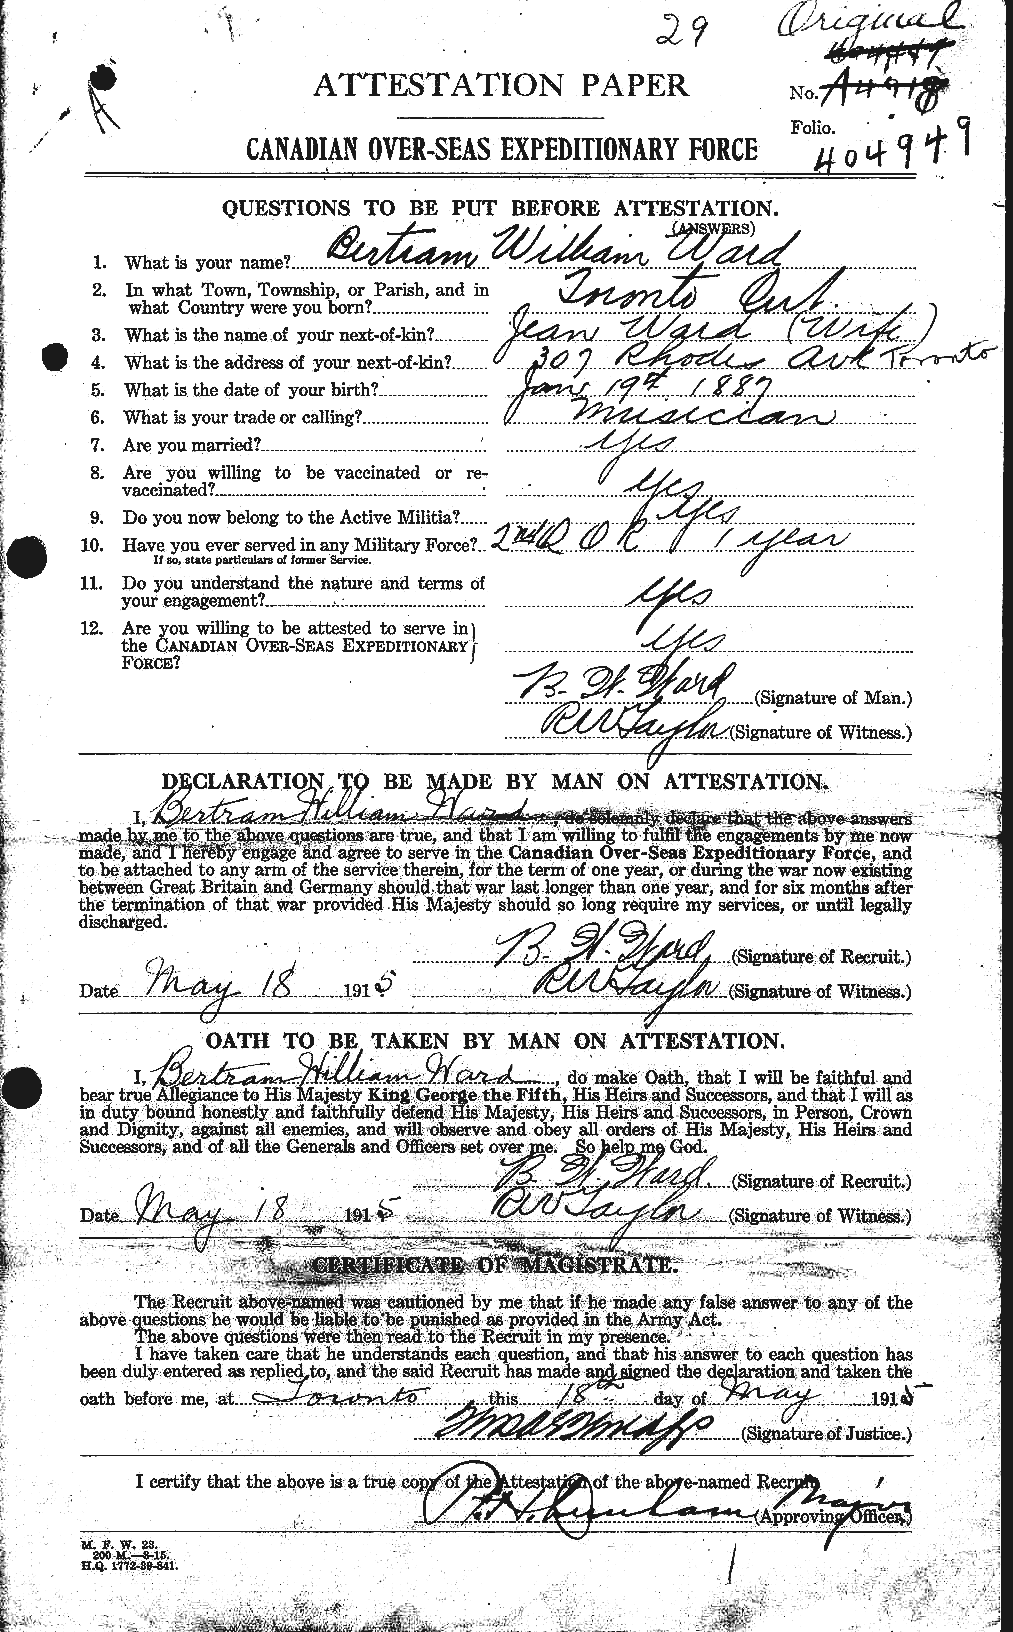 Personnel Records of the First World War - CEF 657548a